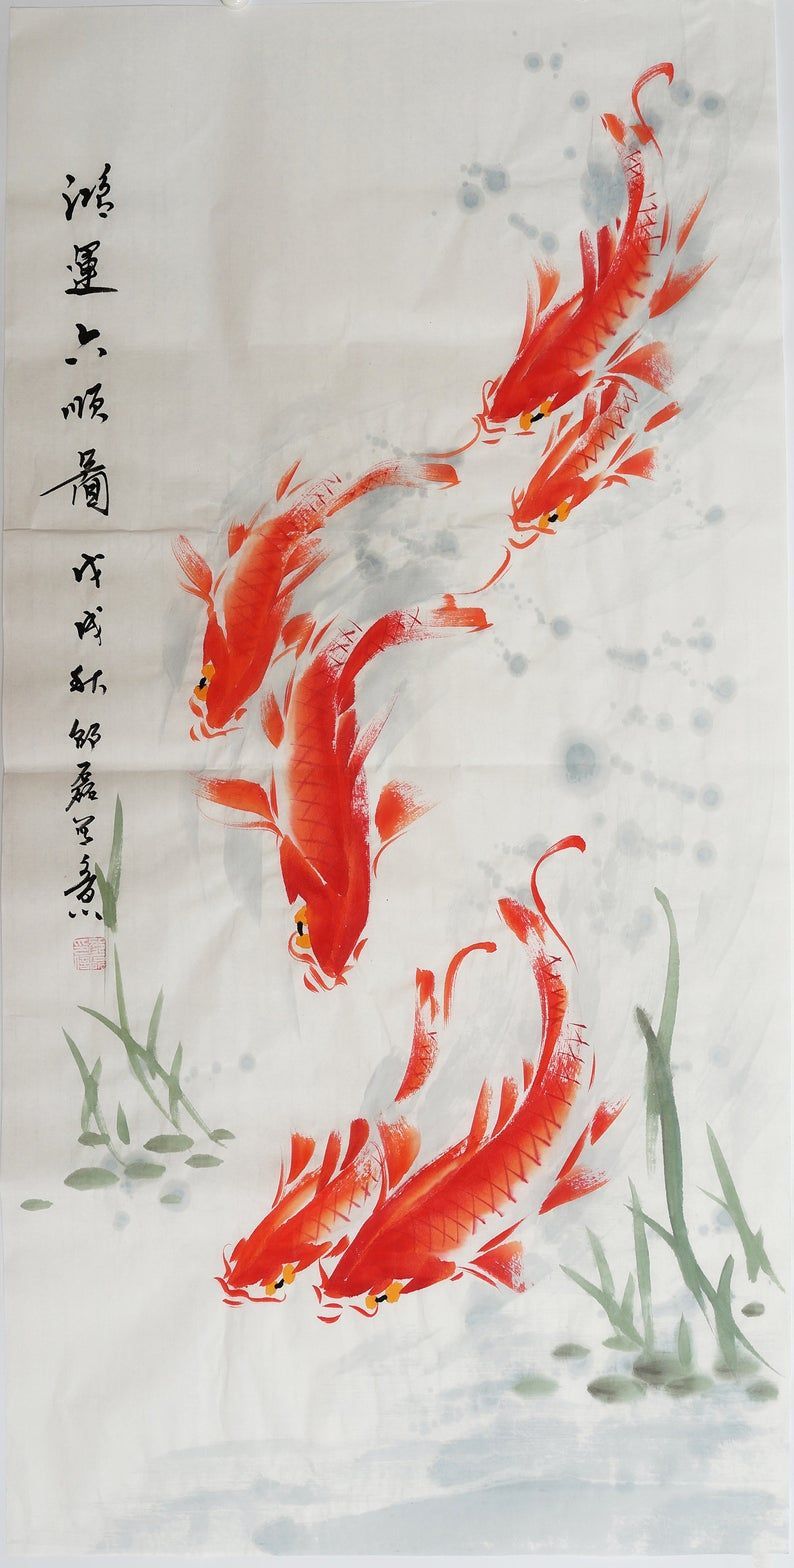 A painting of fish swimming in water - Koi fish